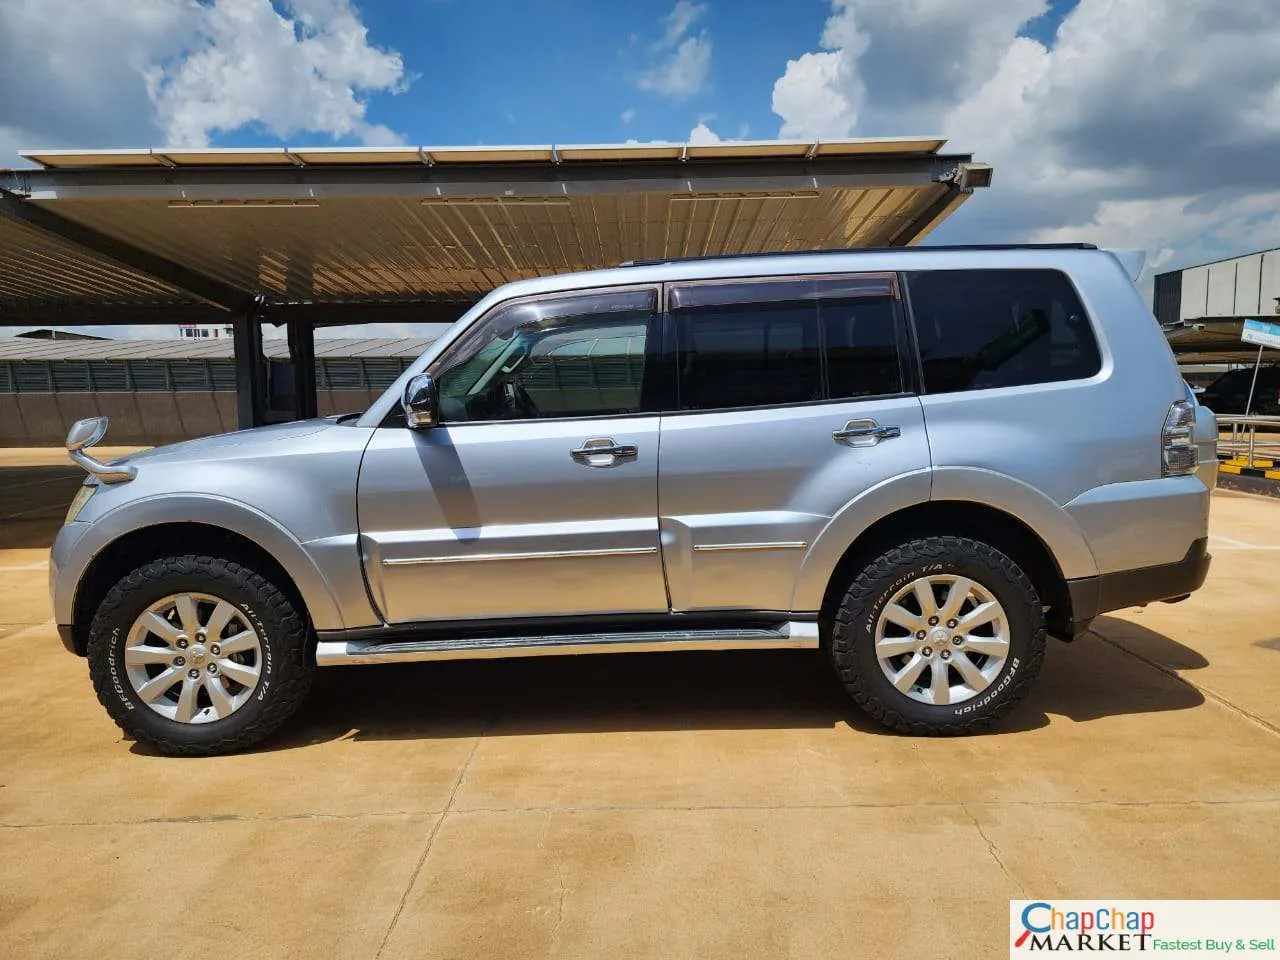 Cars Cars For Sale/Vehicles-Mitsubishi Pajero Super Exceed QUICK SALE You Pay 30% Deposit Trade in Ok EXCLUSIVE 9